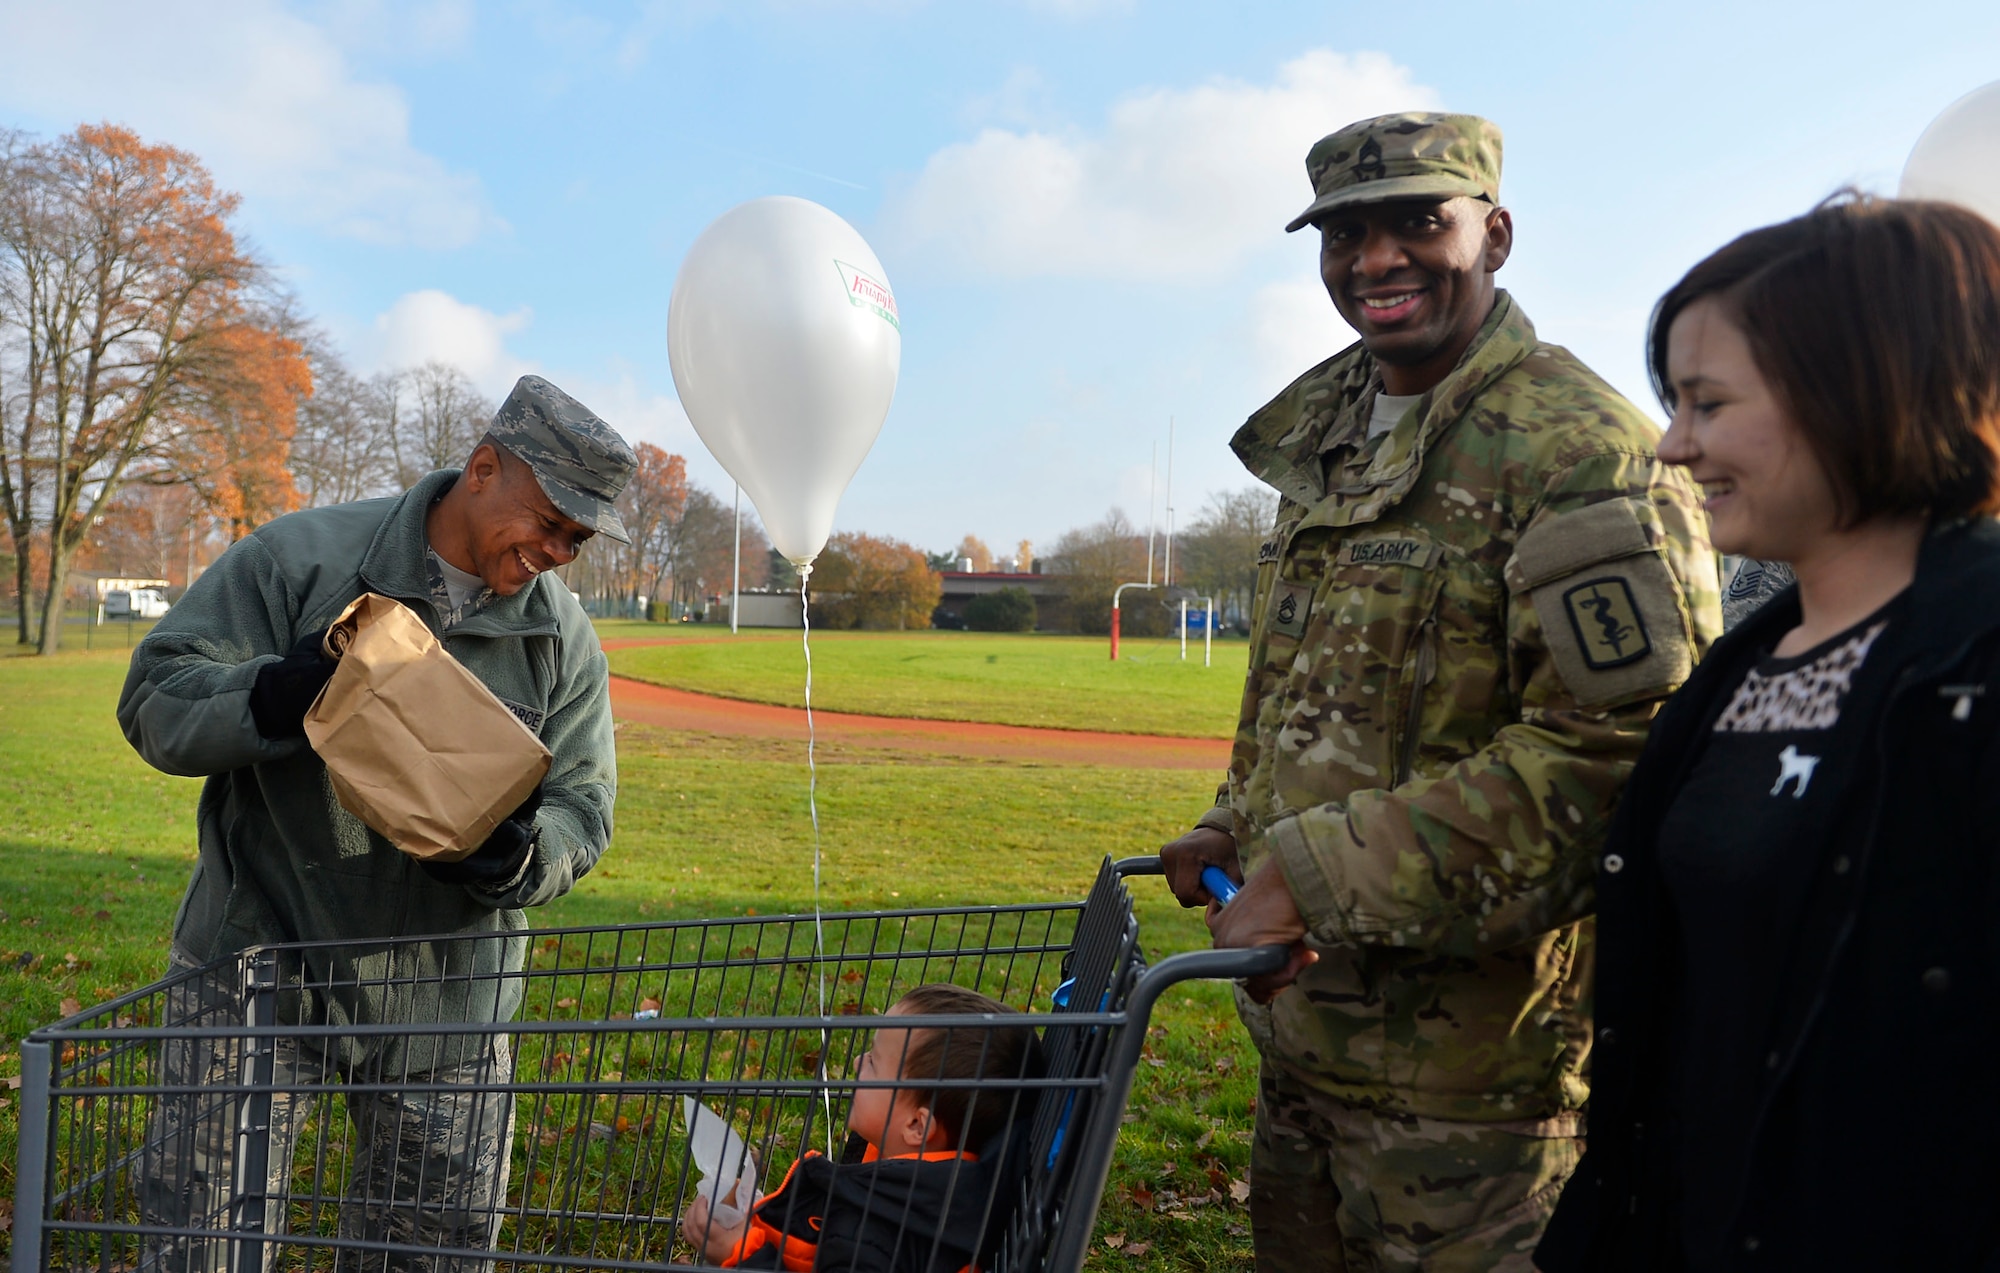 U.S. Air Force Chief Master Sgt. Jackie Harris, 24th Intelligence Squadron superintendent, left, loads a Thanksgiving package into a cart during an event sponsored by the United Services Organization on Vogelweh Military Complex, Germany, Nov. 18, 2017.  Senior enlisted leaders from multiple organizations in the Kaiserslautern Military Community teamed up with the USO to provide military members, pay grade E-5 and below, with Thanksgiving meals. (U.S. Air Force photo by Airman 1st Class Joshua Magbanua)